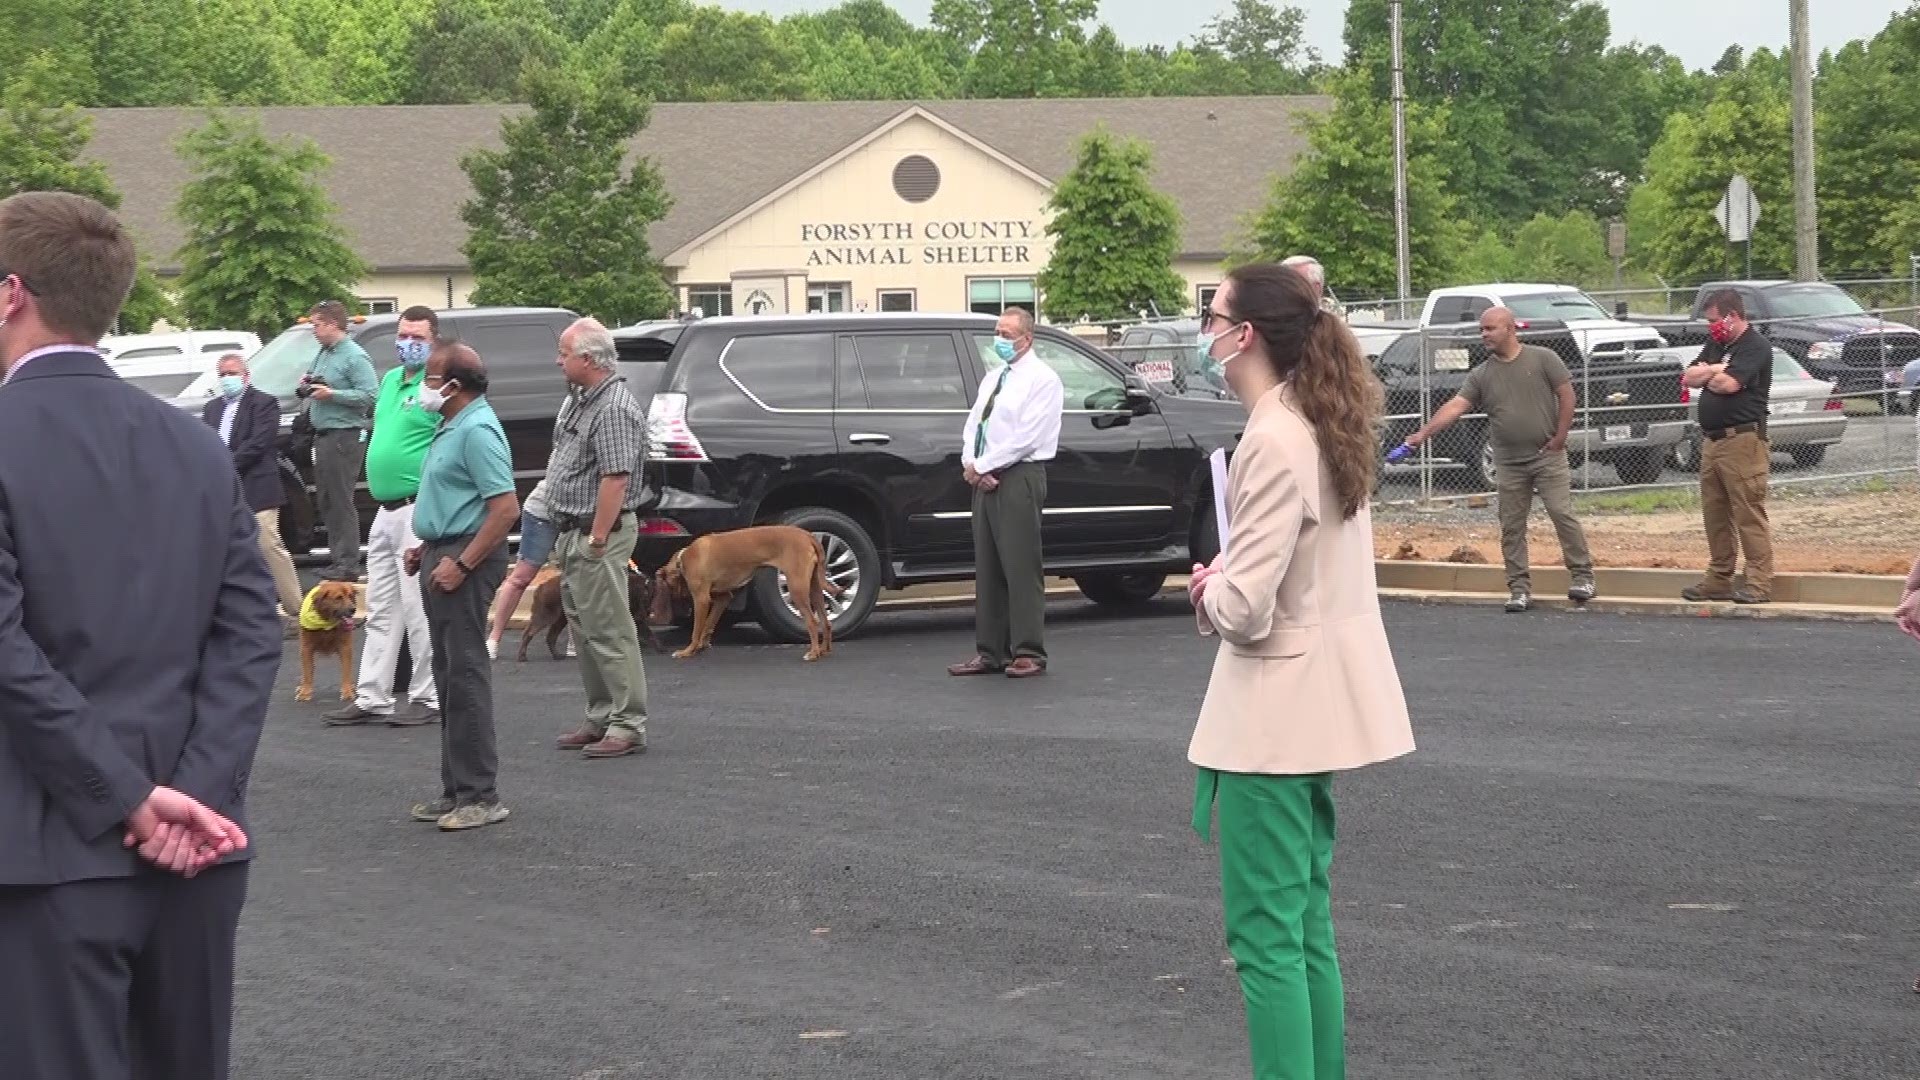 The Forsyth County Animal Shelter is getting a new dog park across the street from the main facility.